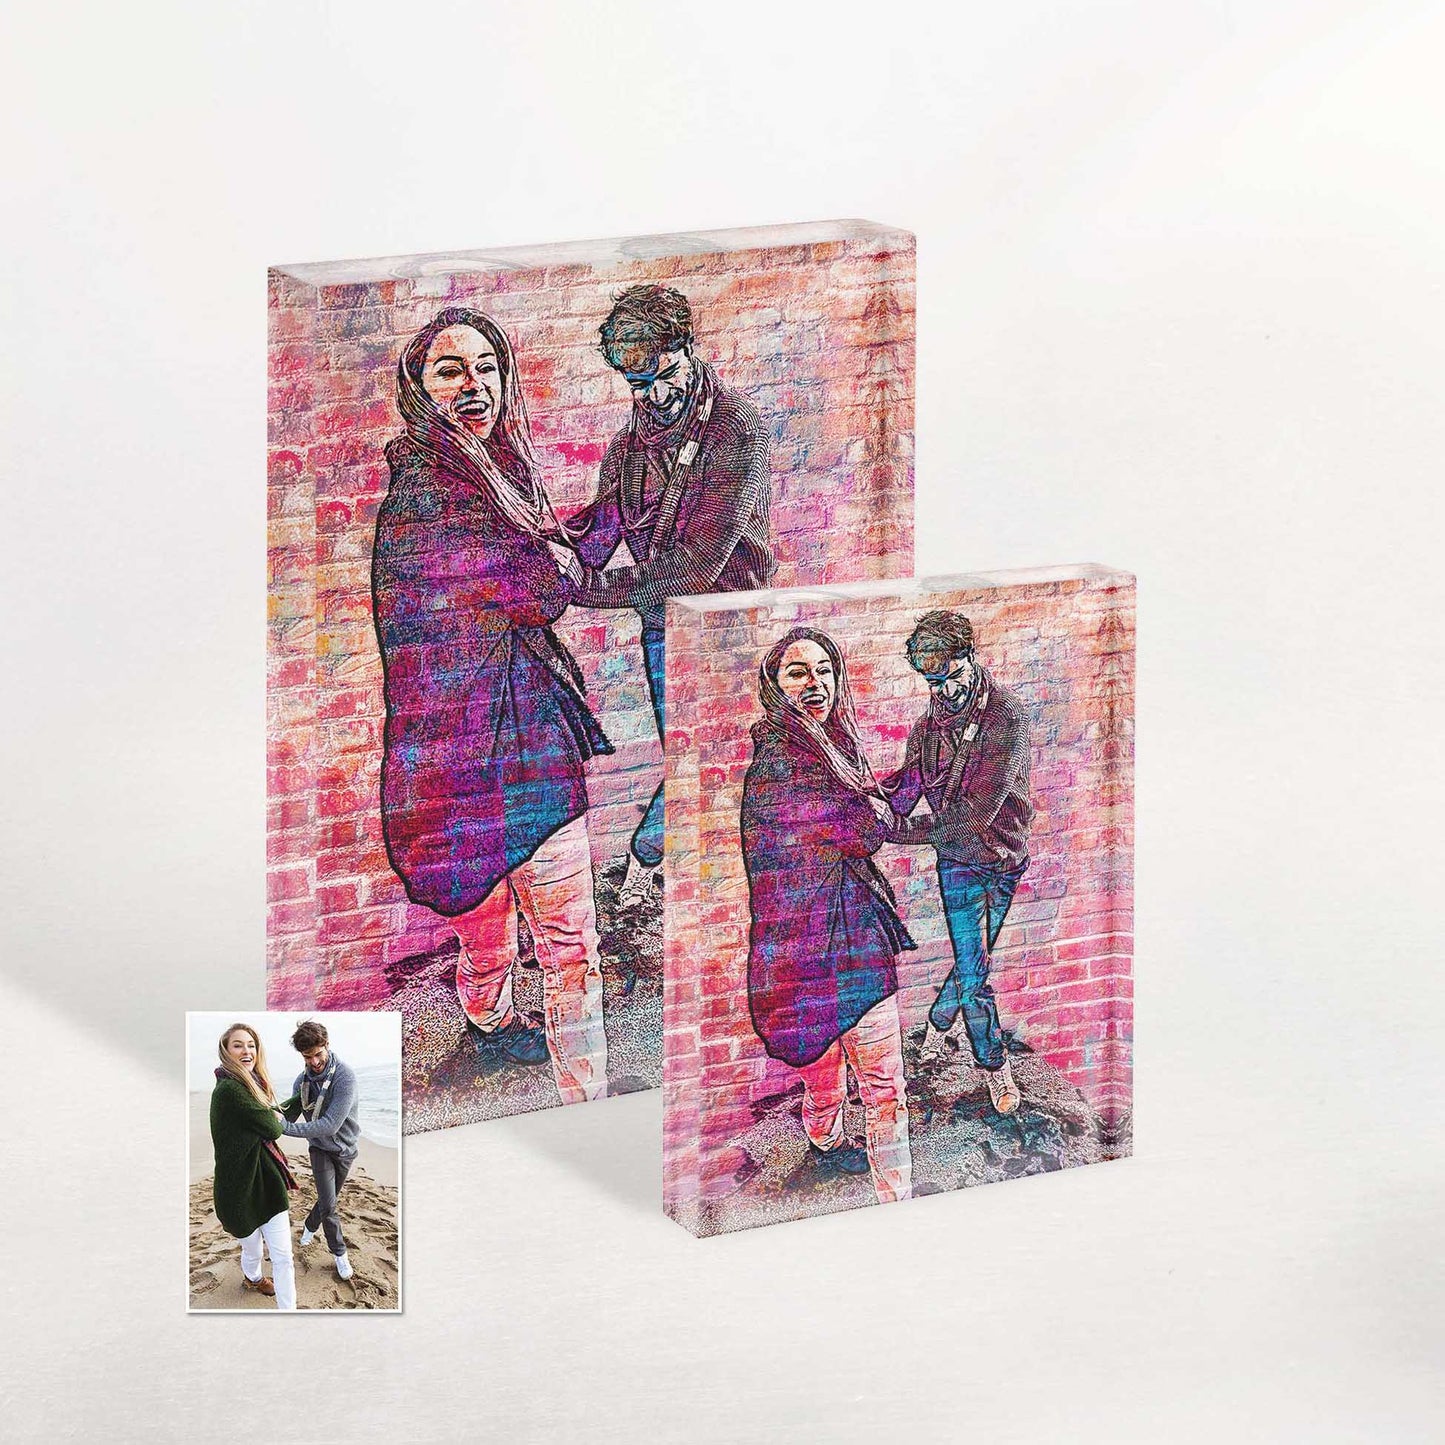 Customise a memorable gift: Personalised Brick Graffiti Art Acrylic Block Photo. Celebrate anniversaries, birthdays, or surprise your friends with this modern home decor piece. The vibrant brick graffiti art adds a unique touch to any space.